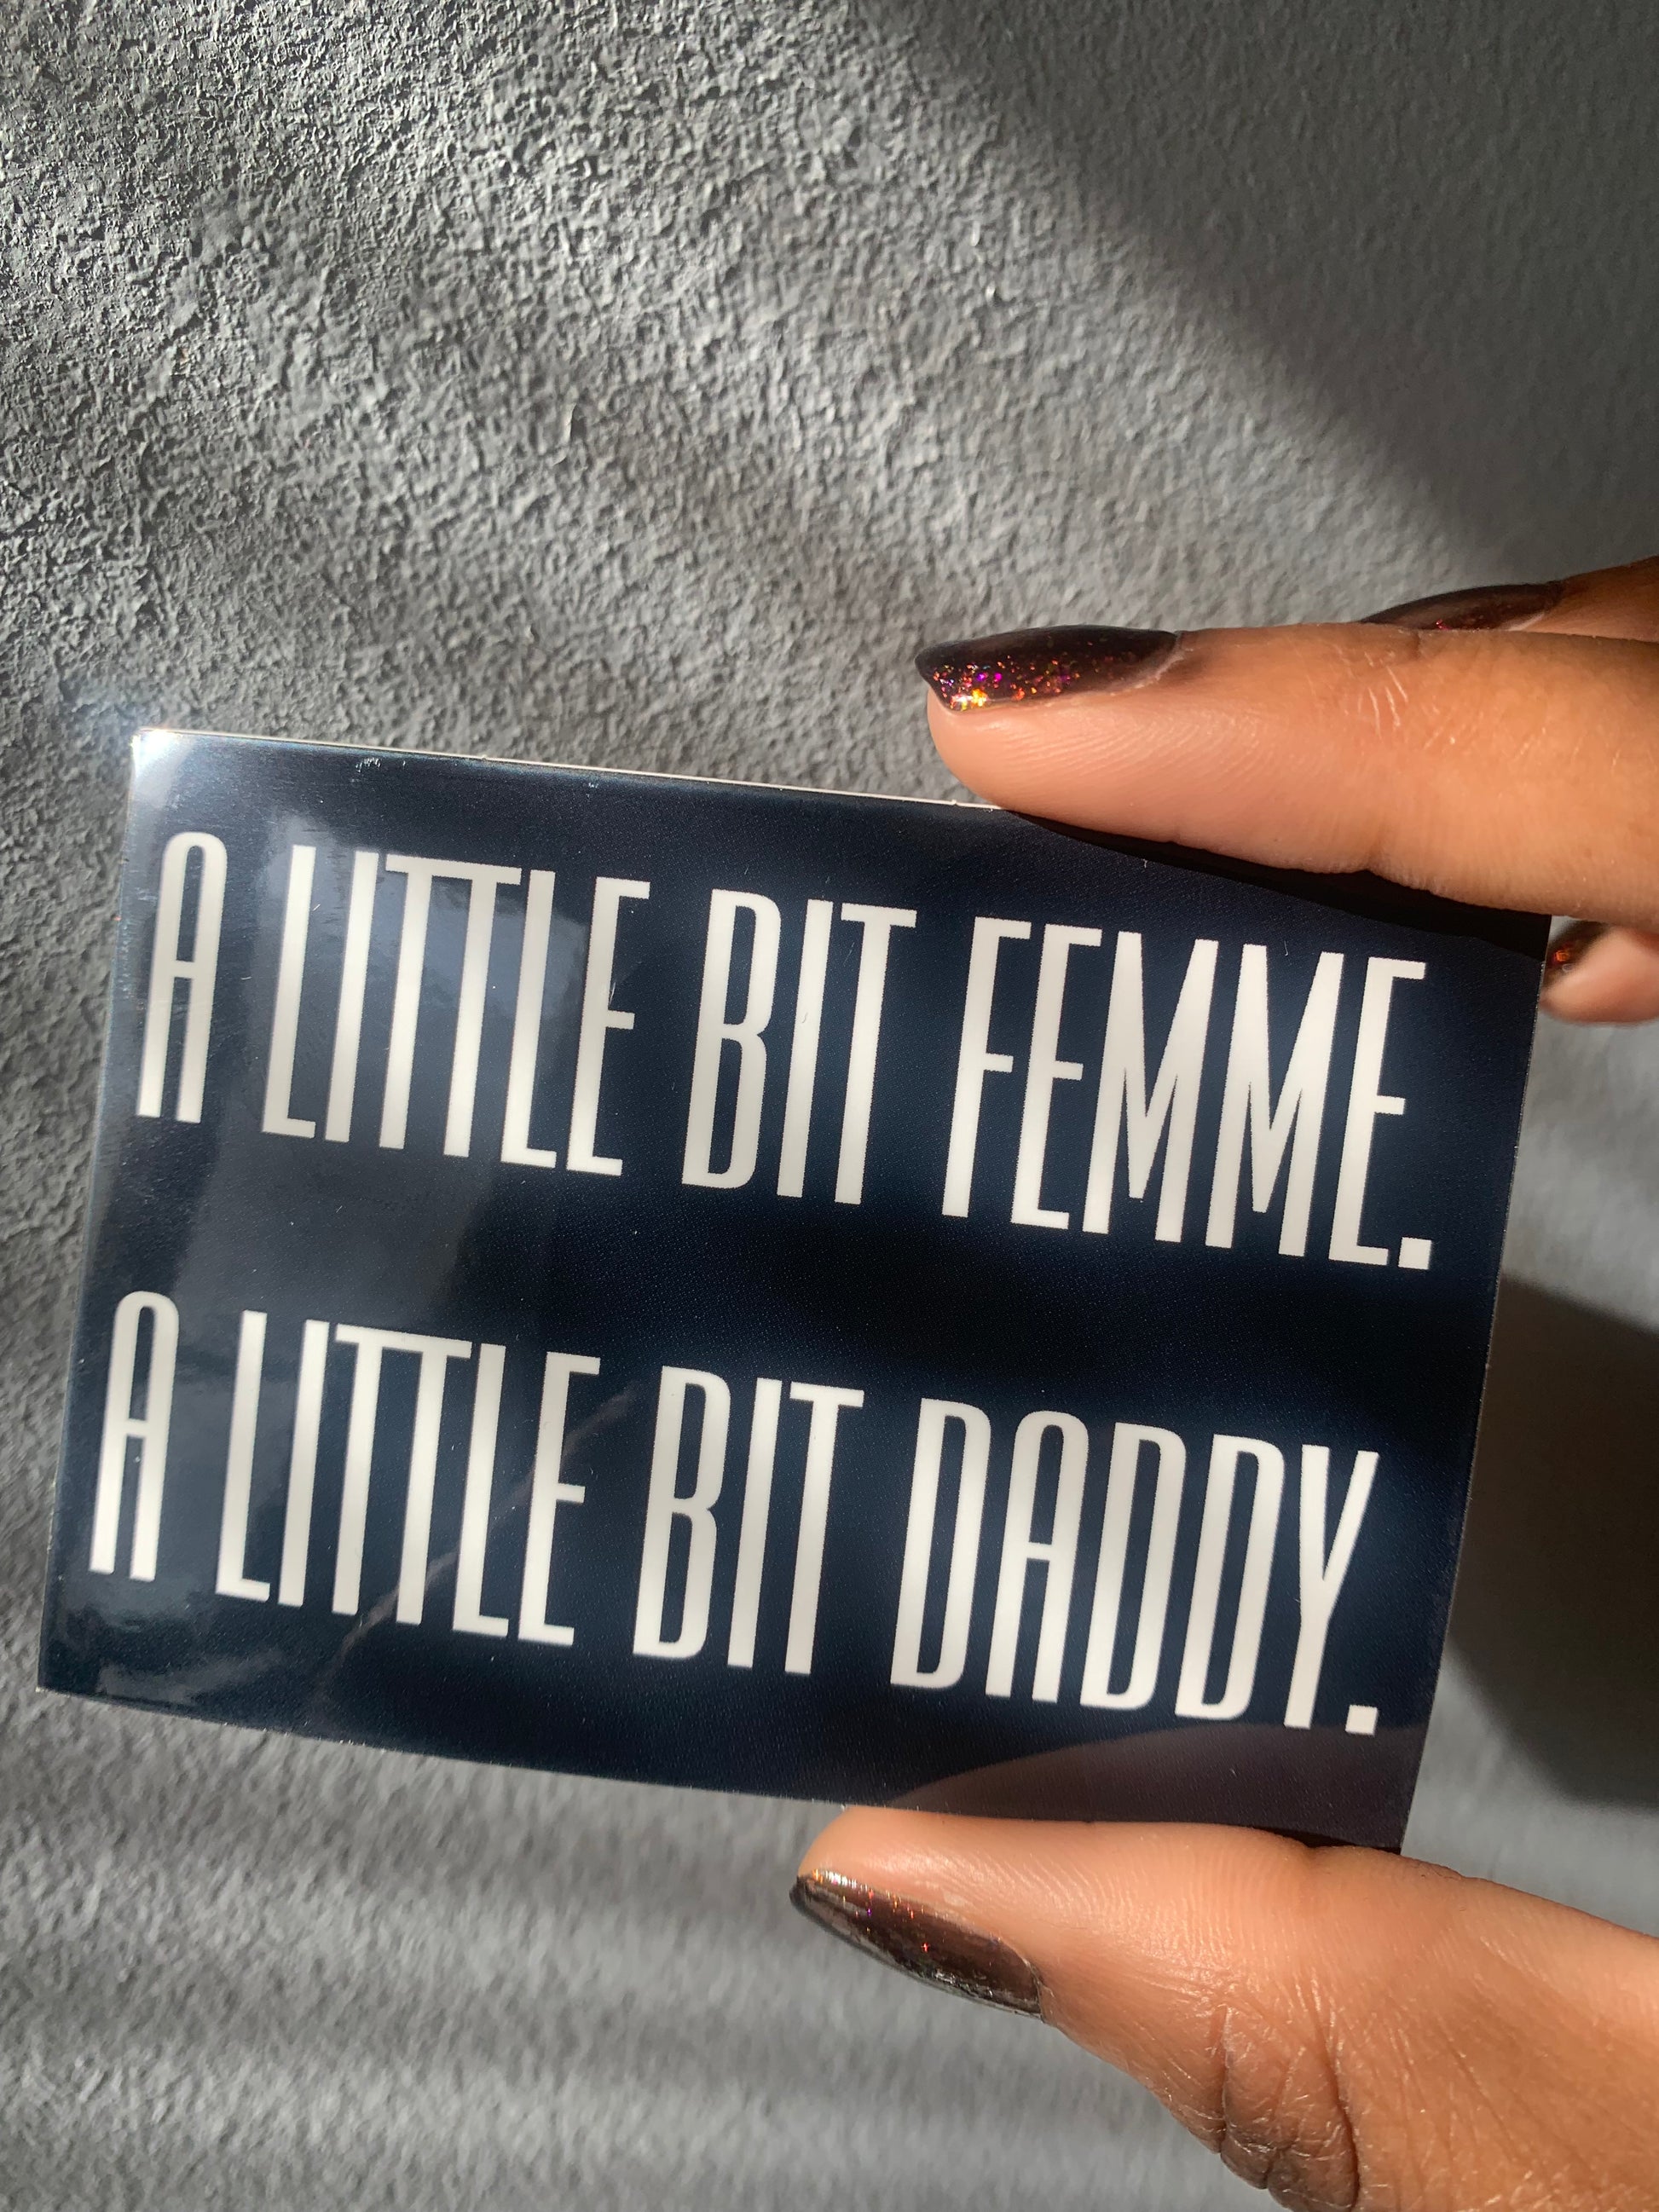 A rectangular black and white glossy vinyl sticker held between two fingers that reads A LITTLE BIT FEMME. A LITTLE BIT DADDY. In bold white text over a black background.